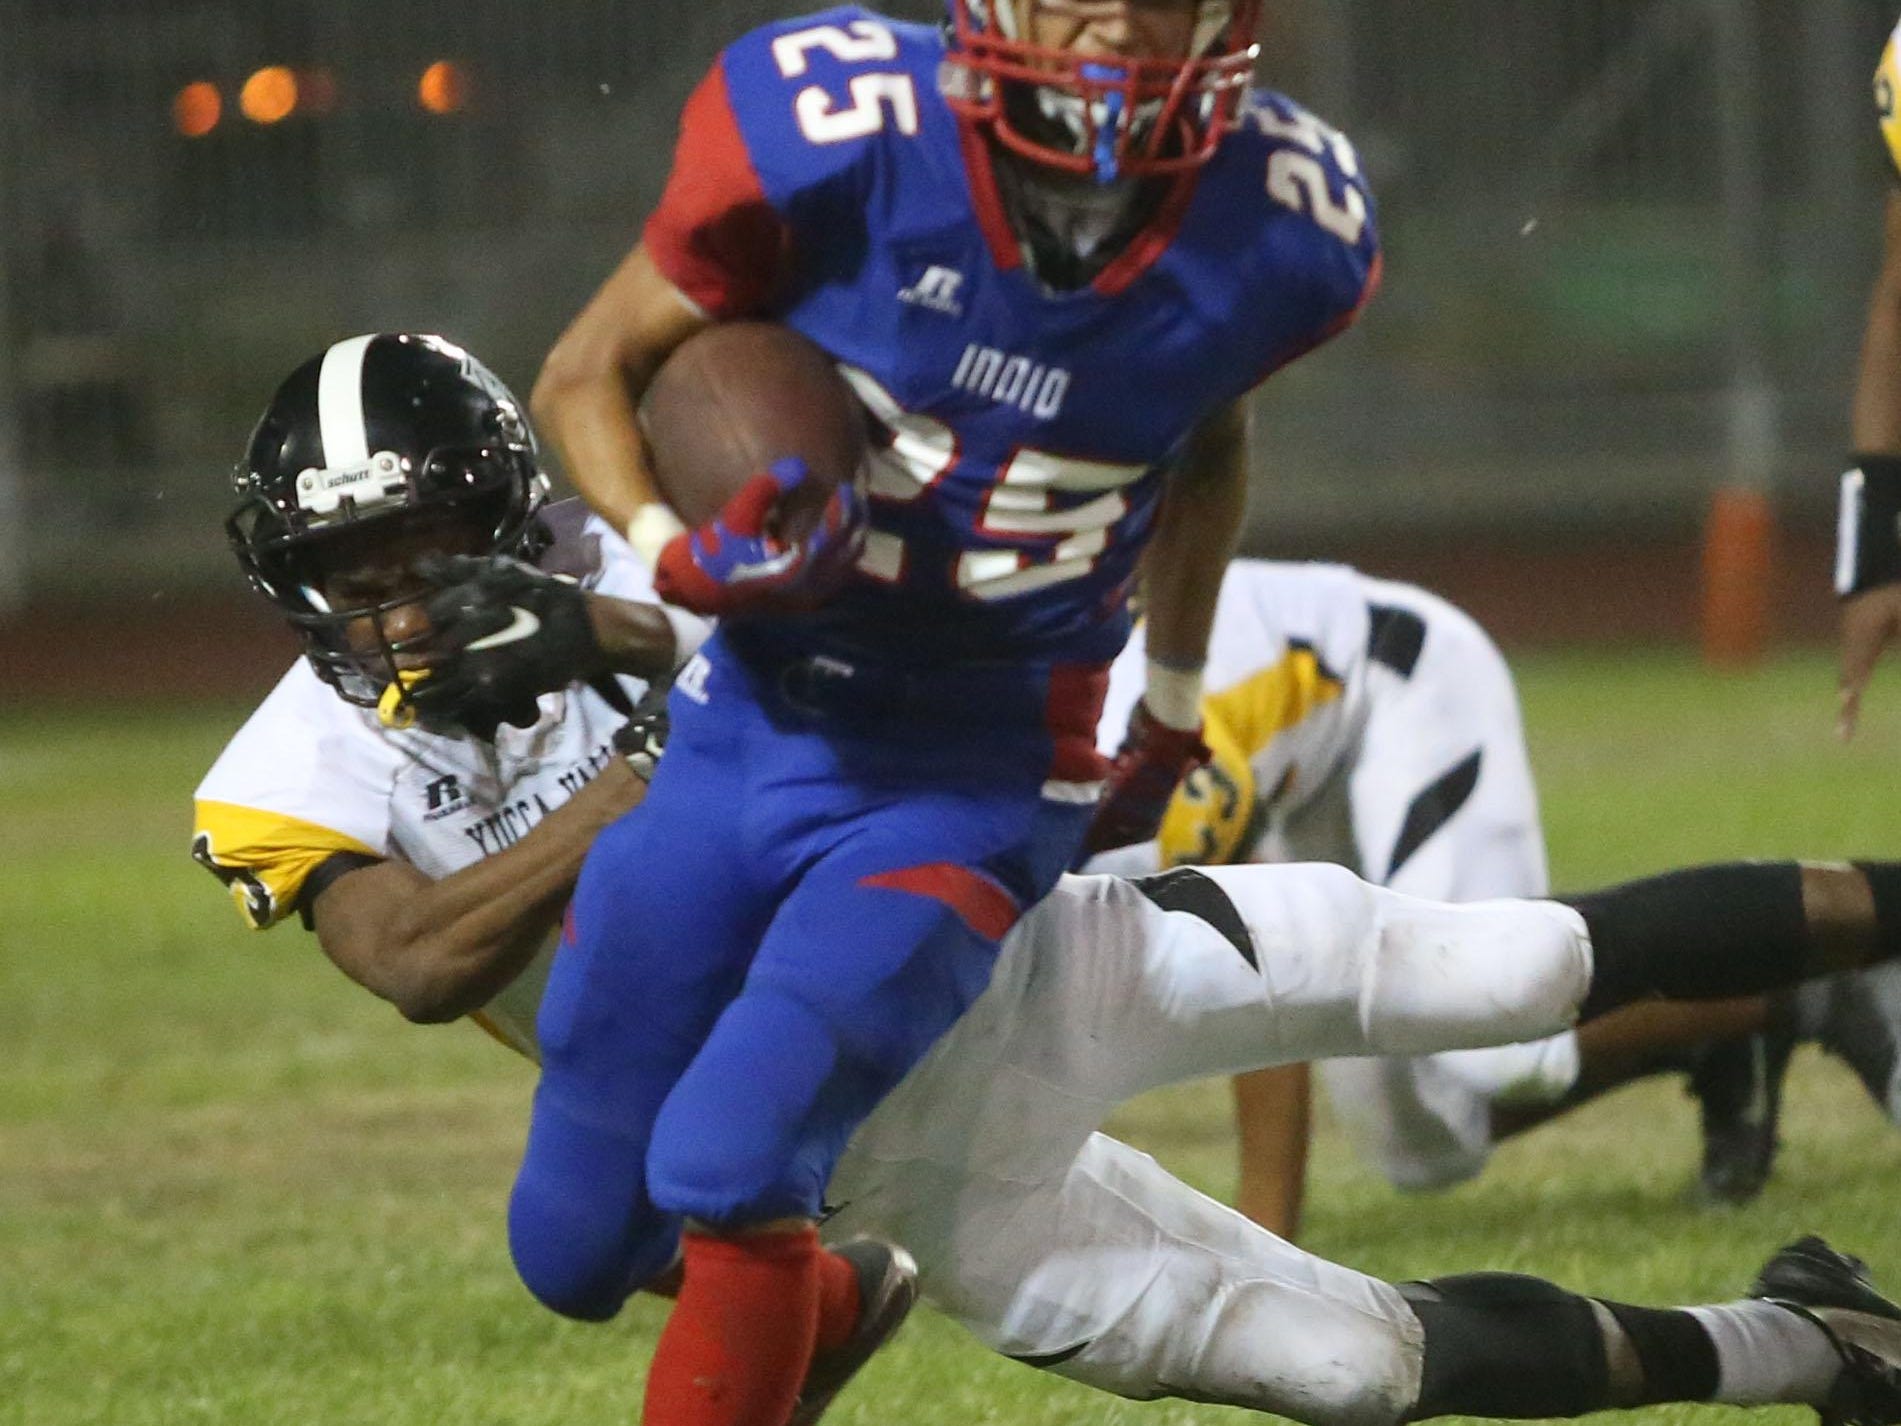 Indio High School's Joseph Gonzalez runs for yardage against Yucca Valley during their game at Ed White stadium in Indio on Friday. Indio won 29-6.